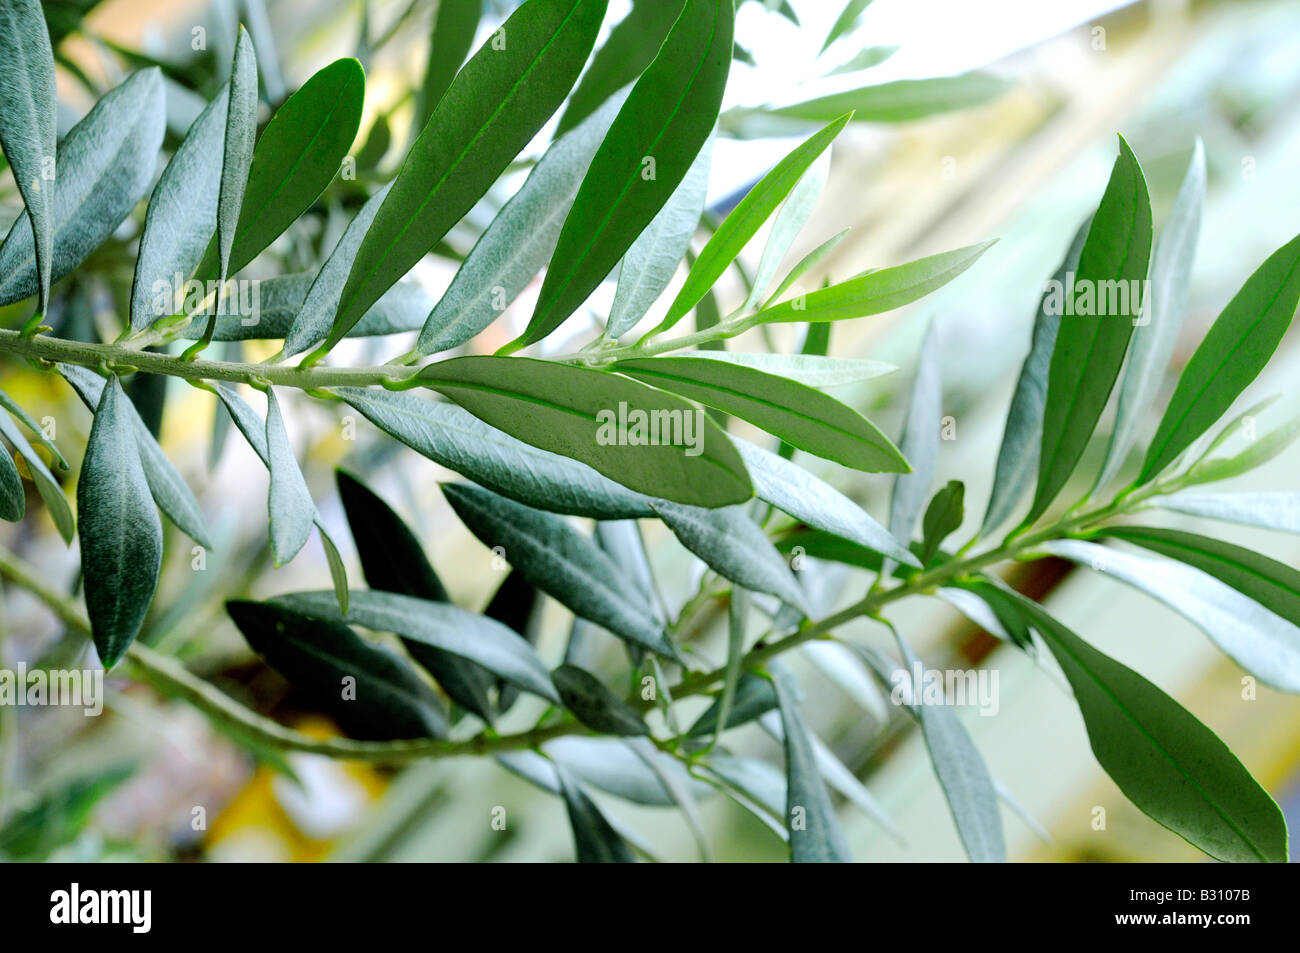 BRANCHES OF OLIVE TREE Stock Photo